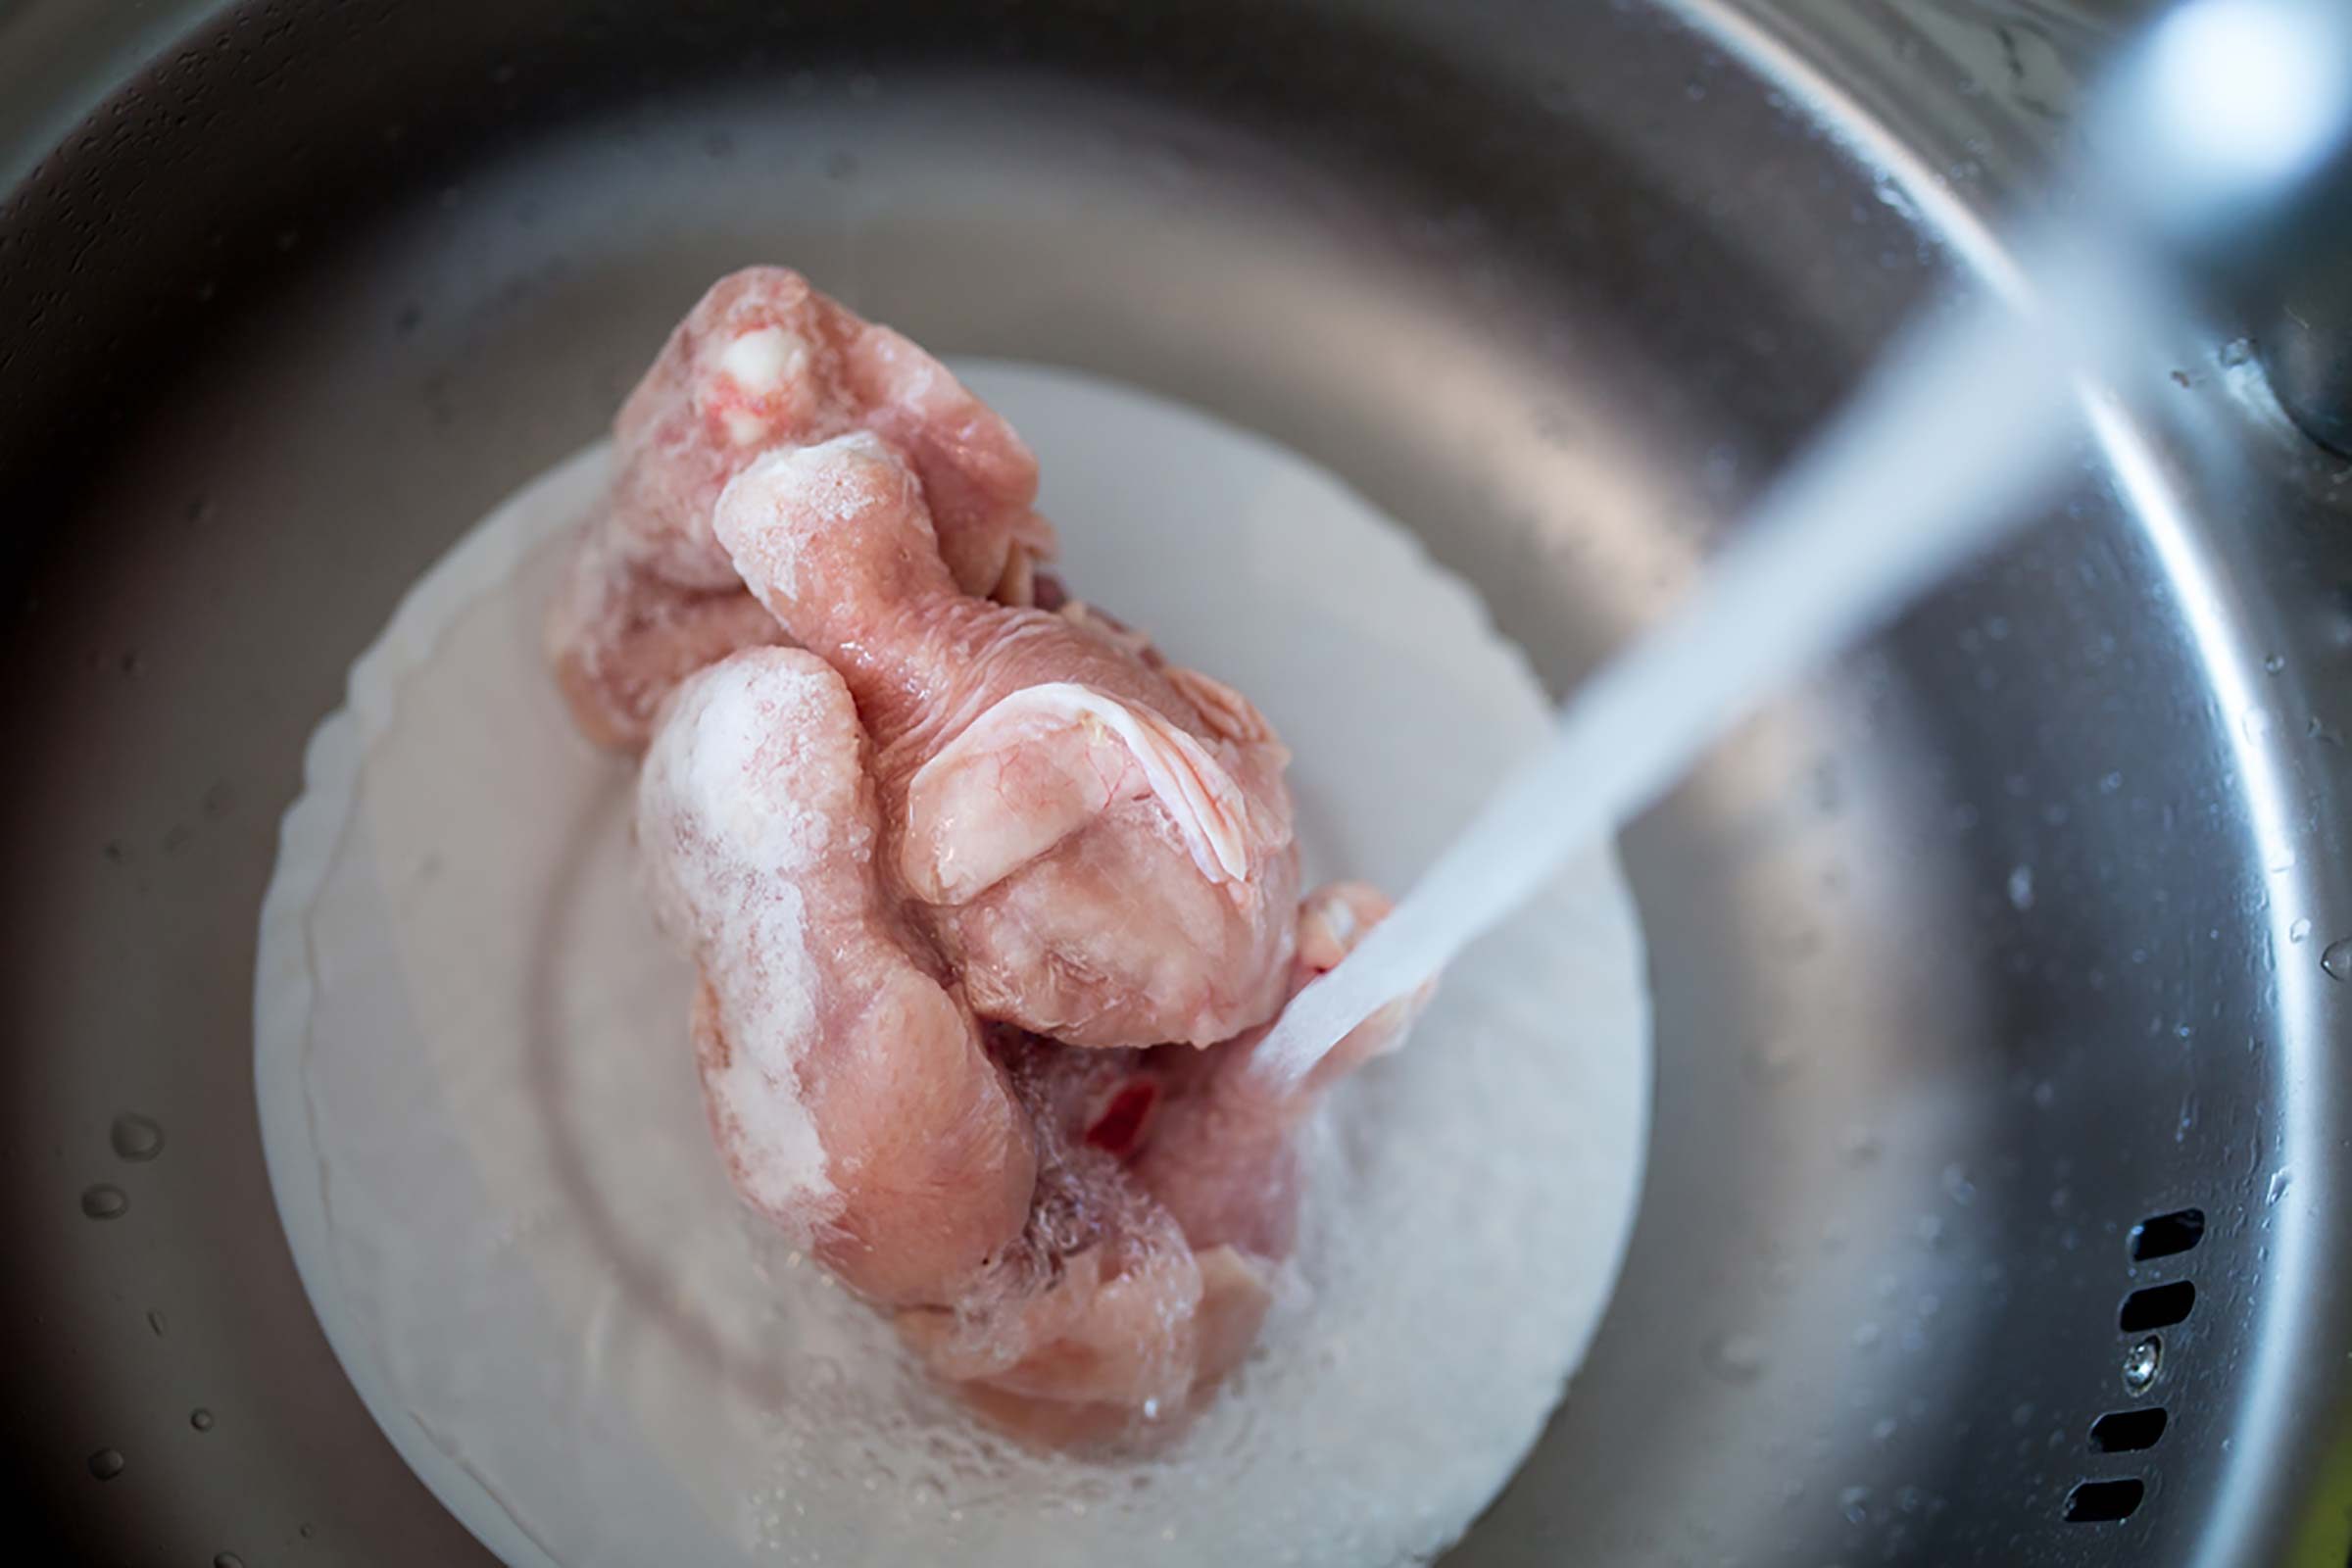 Myths About Frozen Food You Need to Stop Believing | Reader's Digest